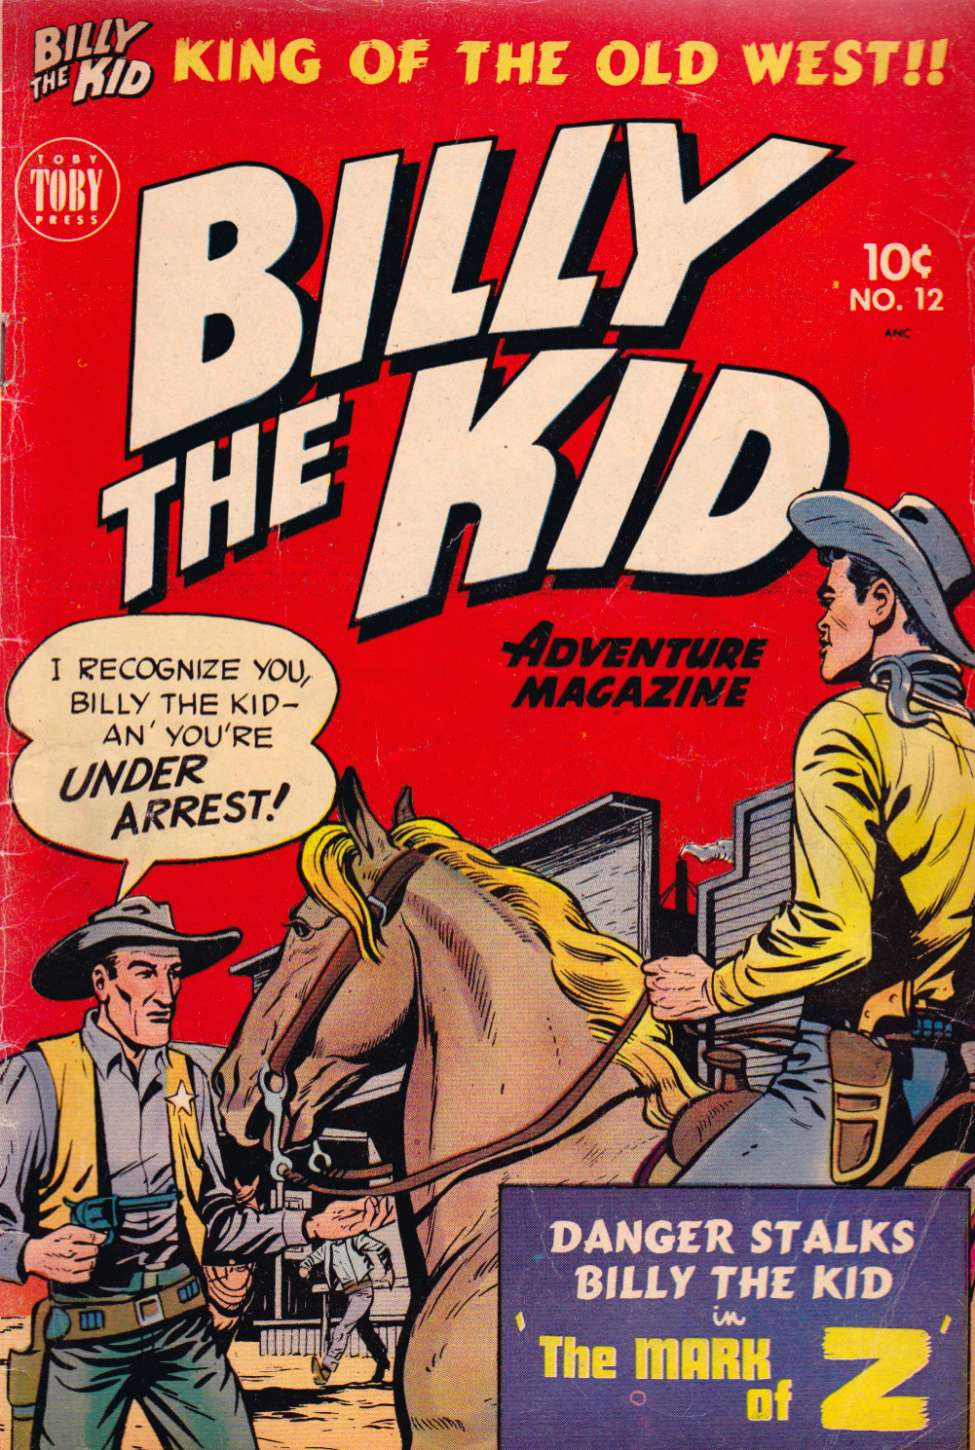 Book Cover For Billy the Kid Adventure Magazine 12